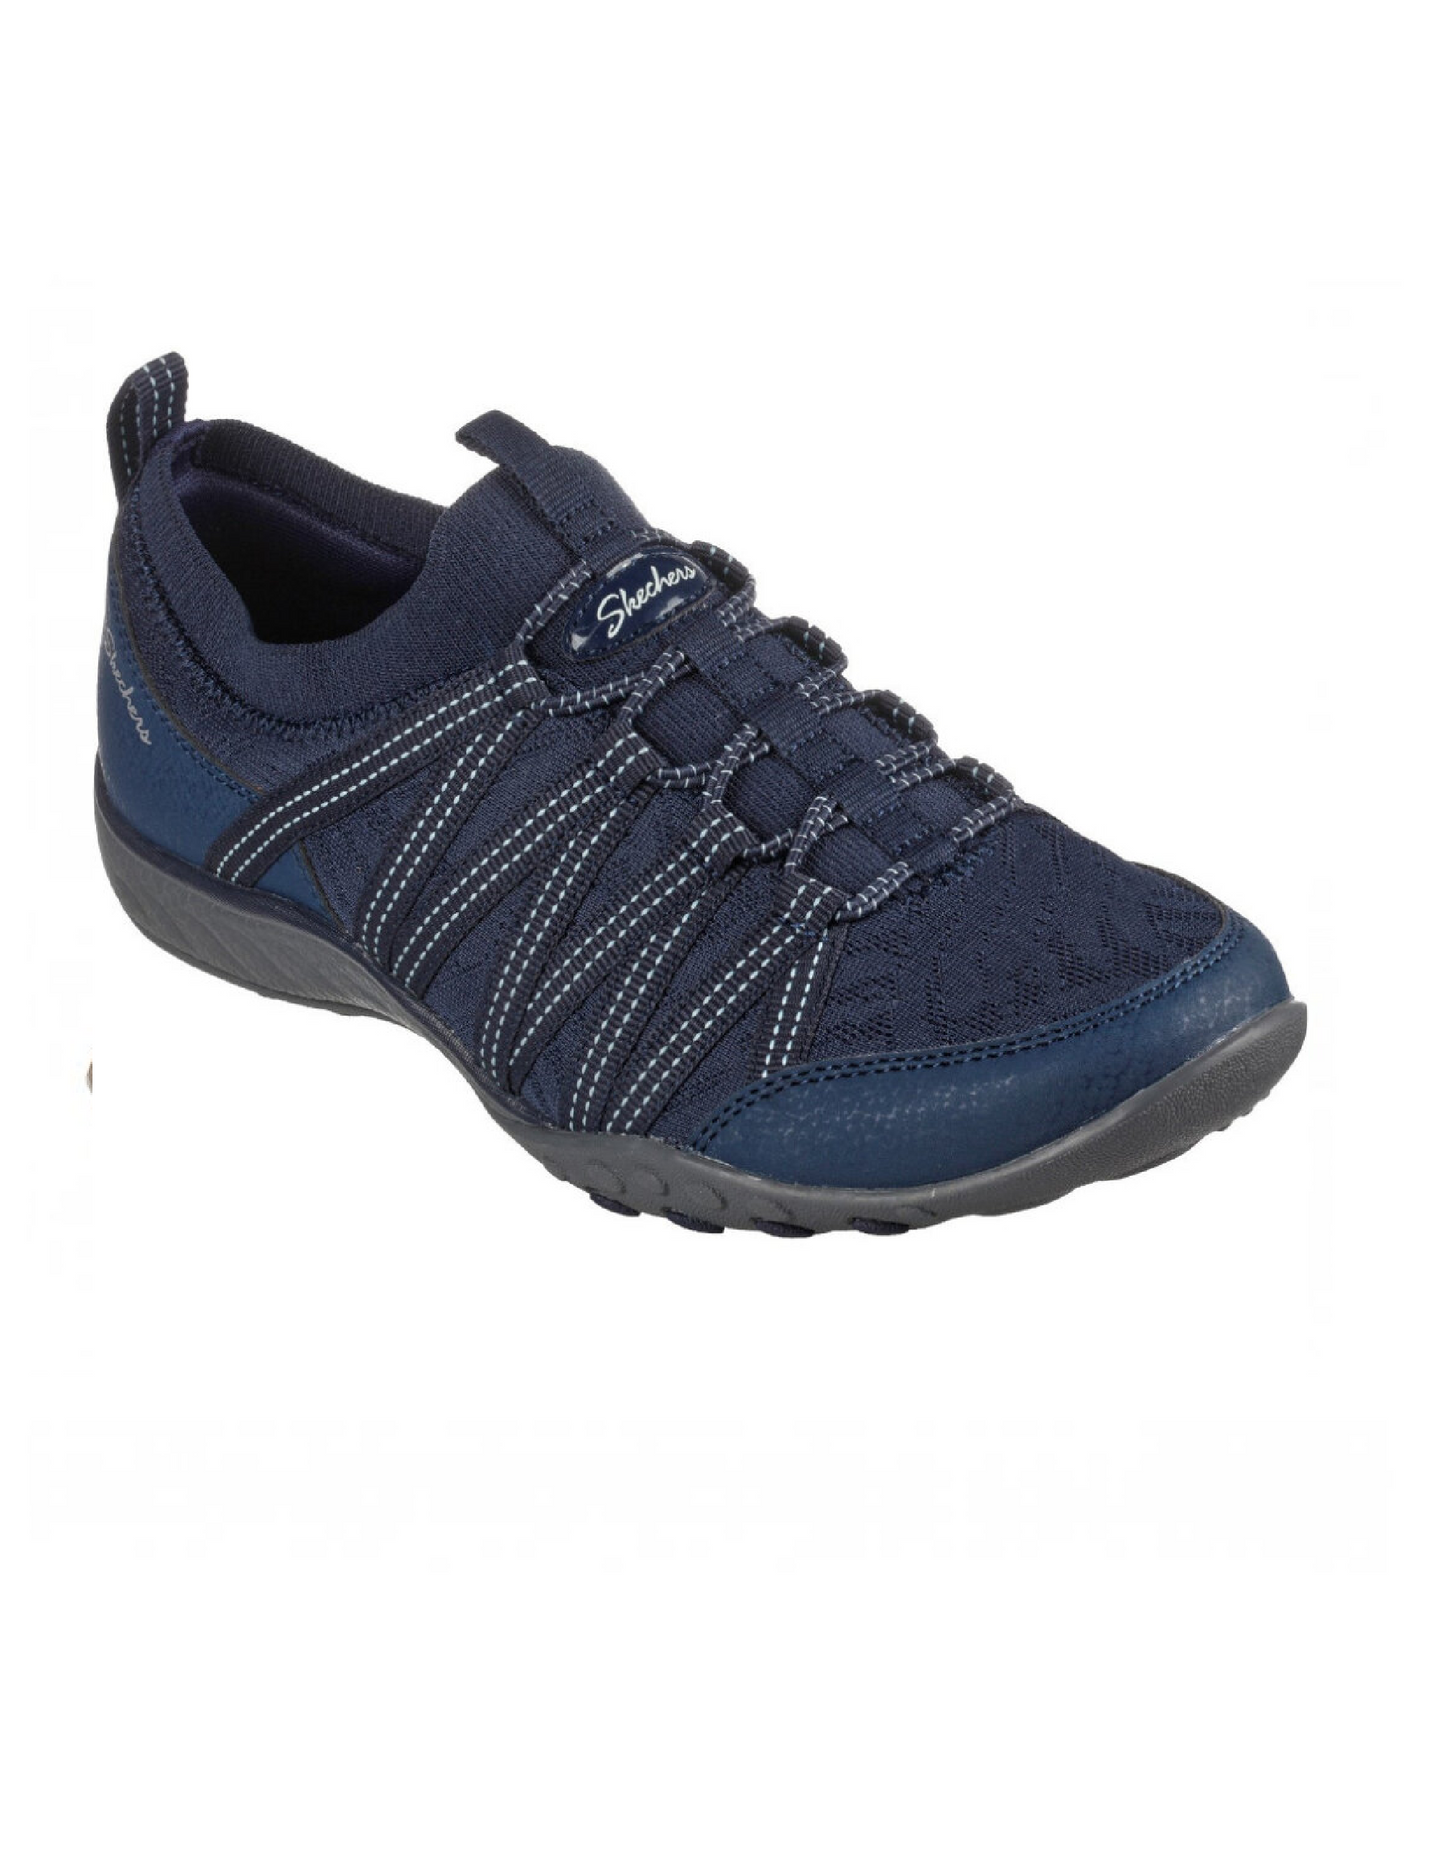 Skechers 100244 NVY Navy Relaxed Fit: Breathe-Easy - First Light